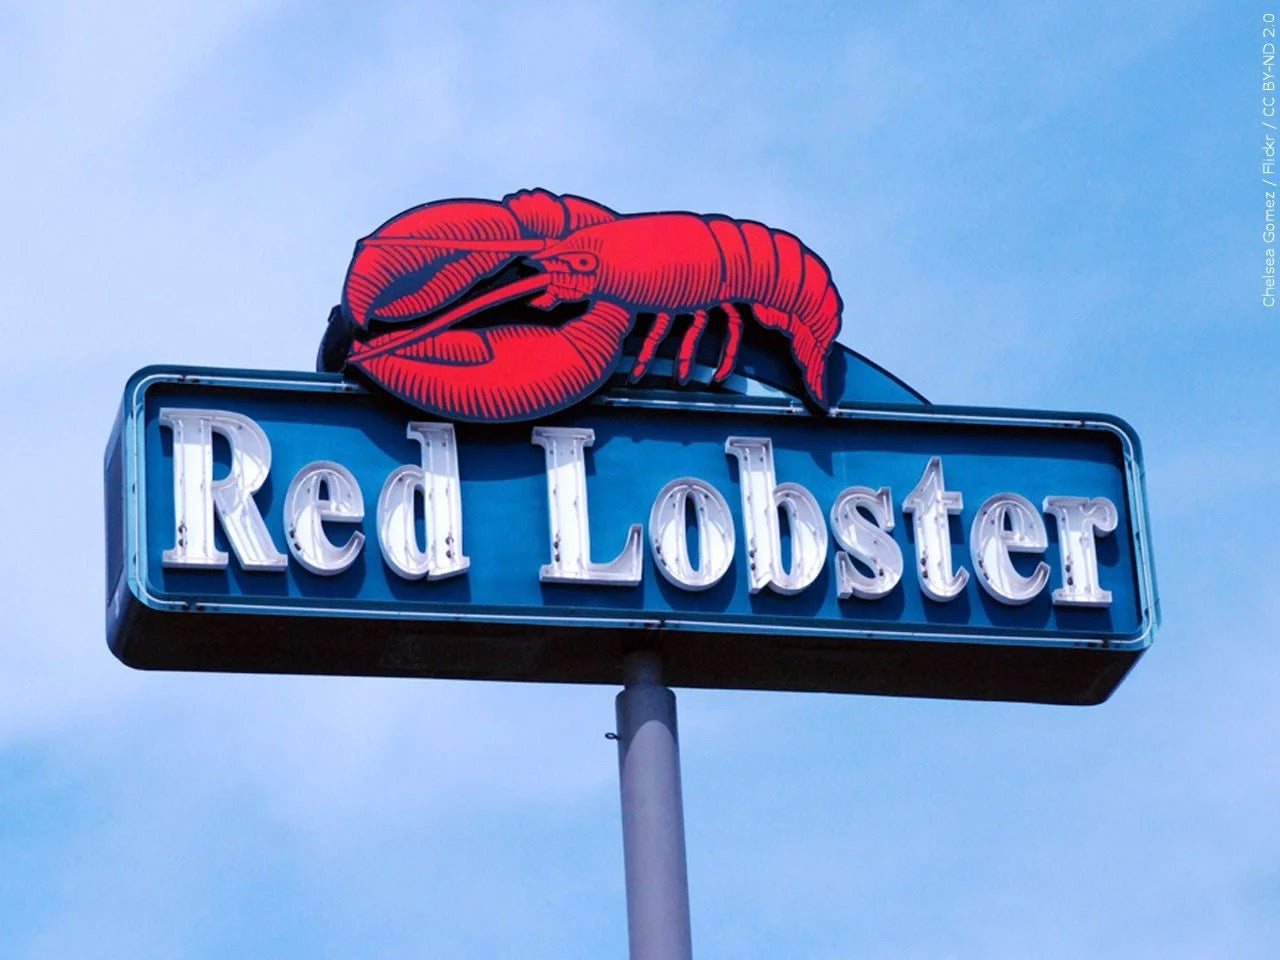 From Sea to Shining Bankruptcy: How America's Appetite Sank The Red Lobster Empire